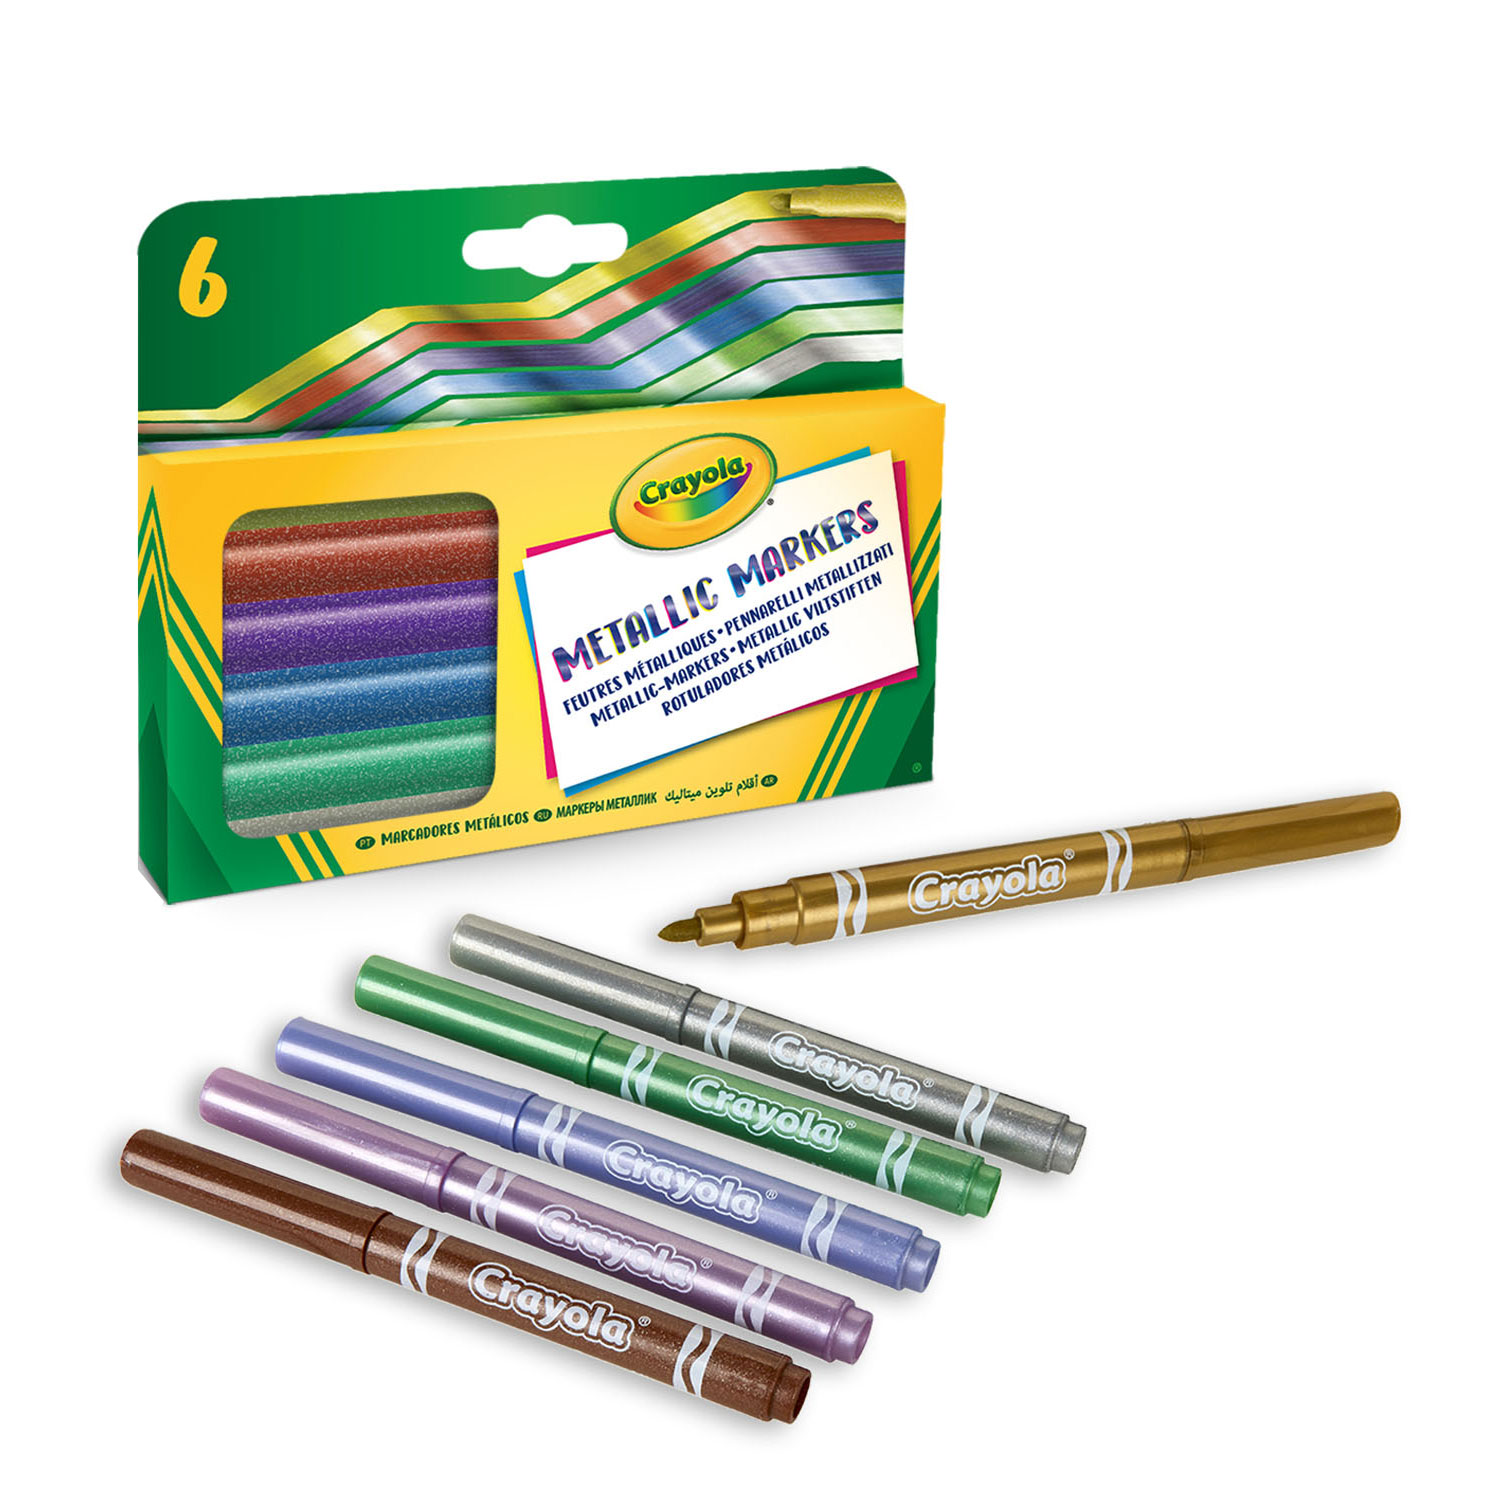 Crayola Project Metallic Markers, 8 Count